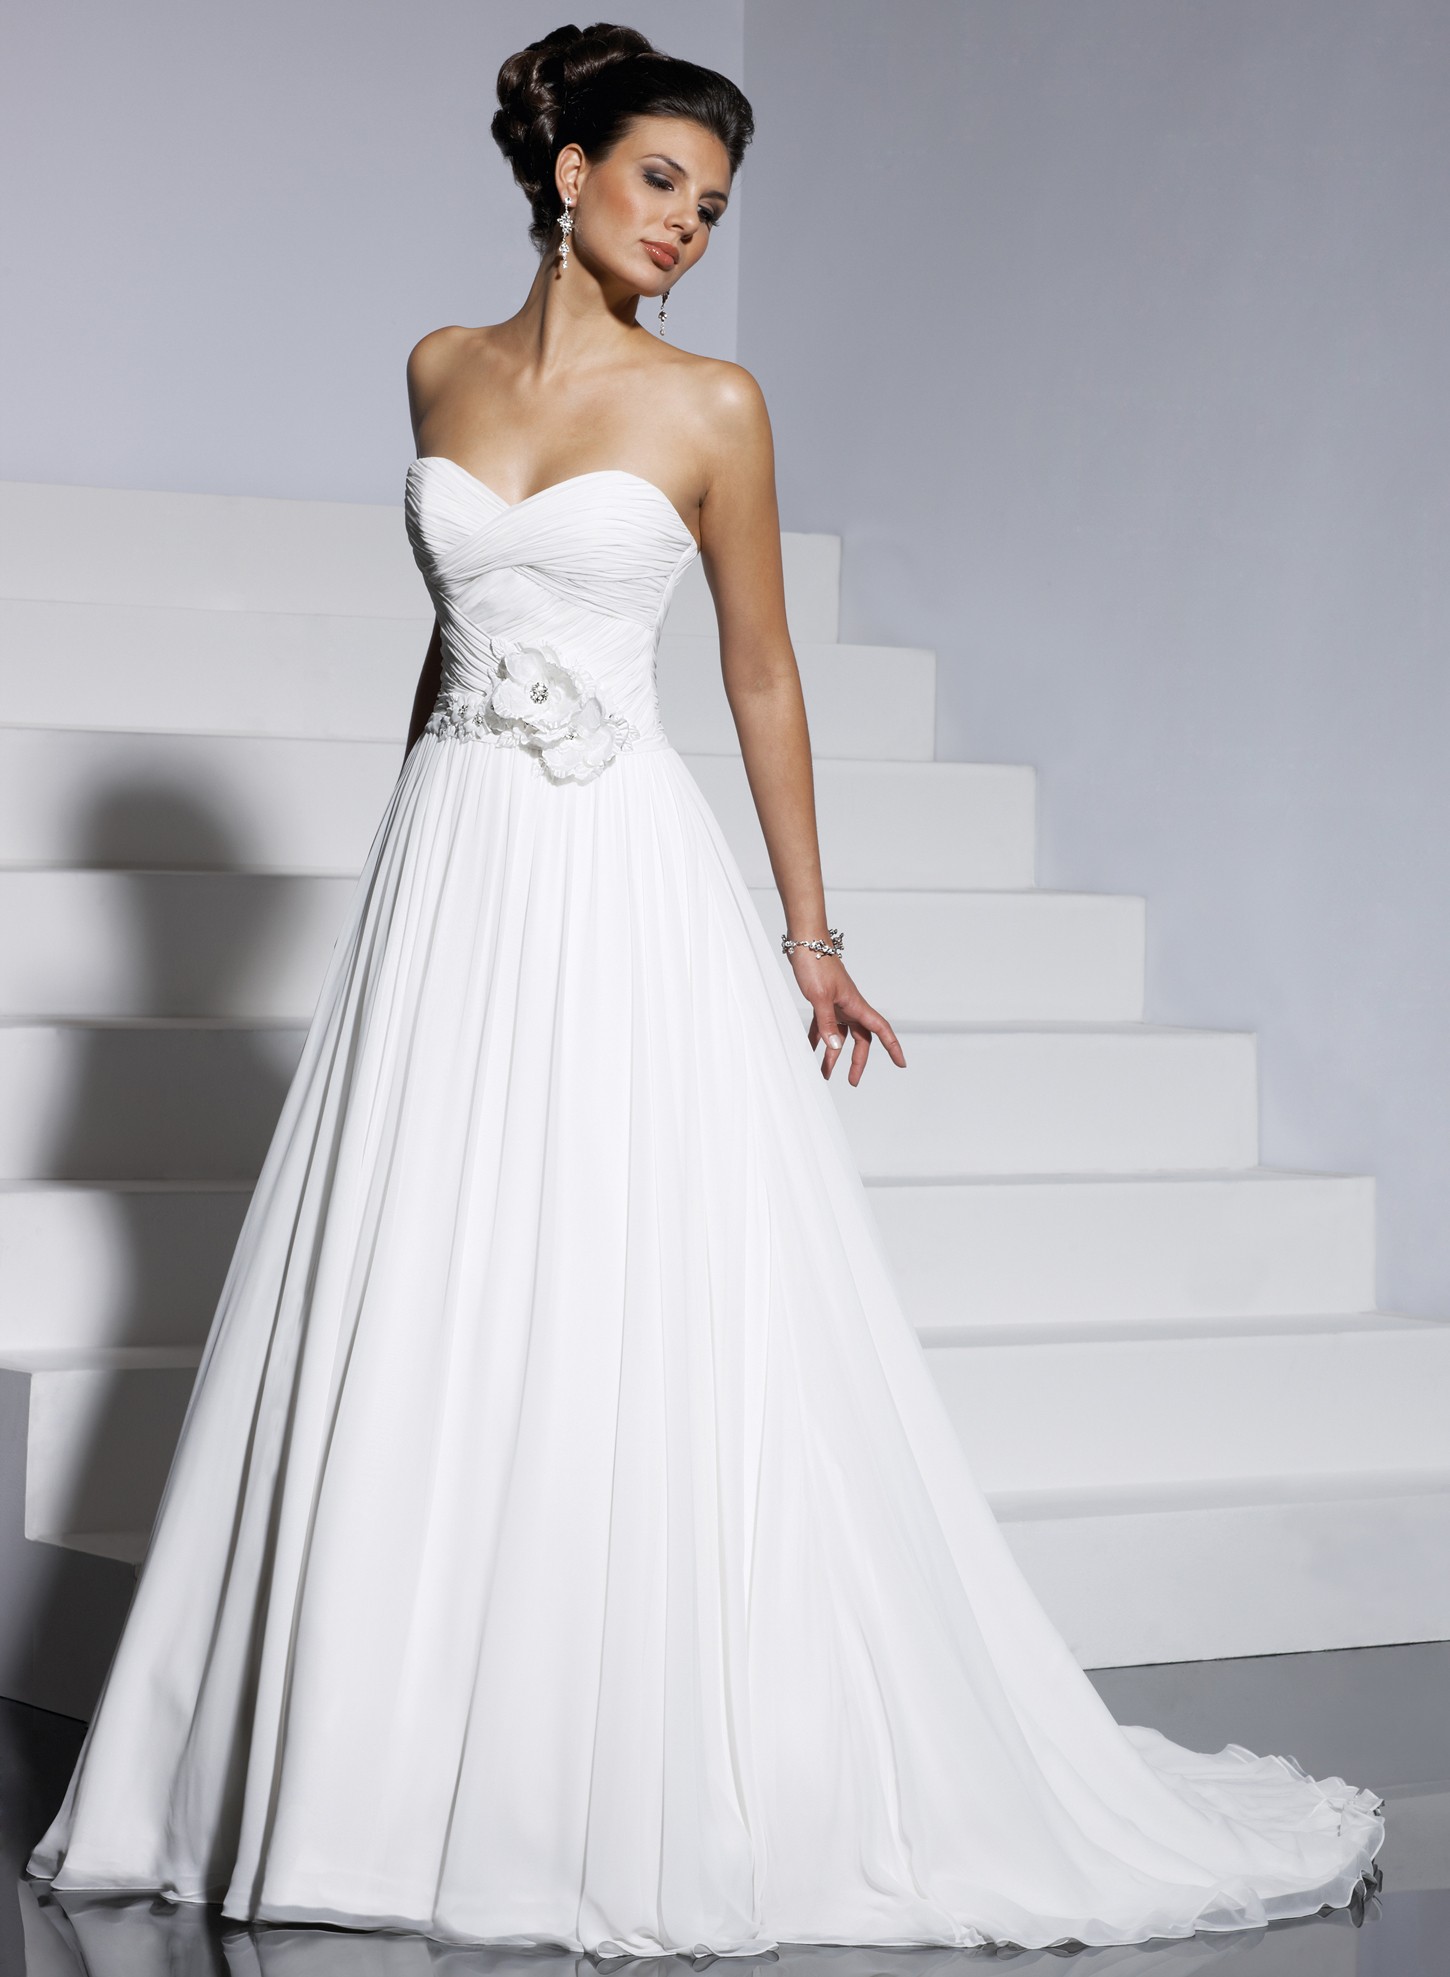 Elegant A Line Wedding Dresses Best 10 - Find the Perfect Venue for ...